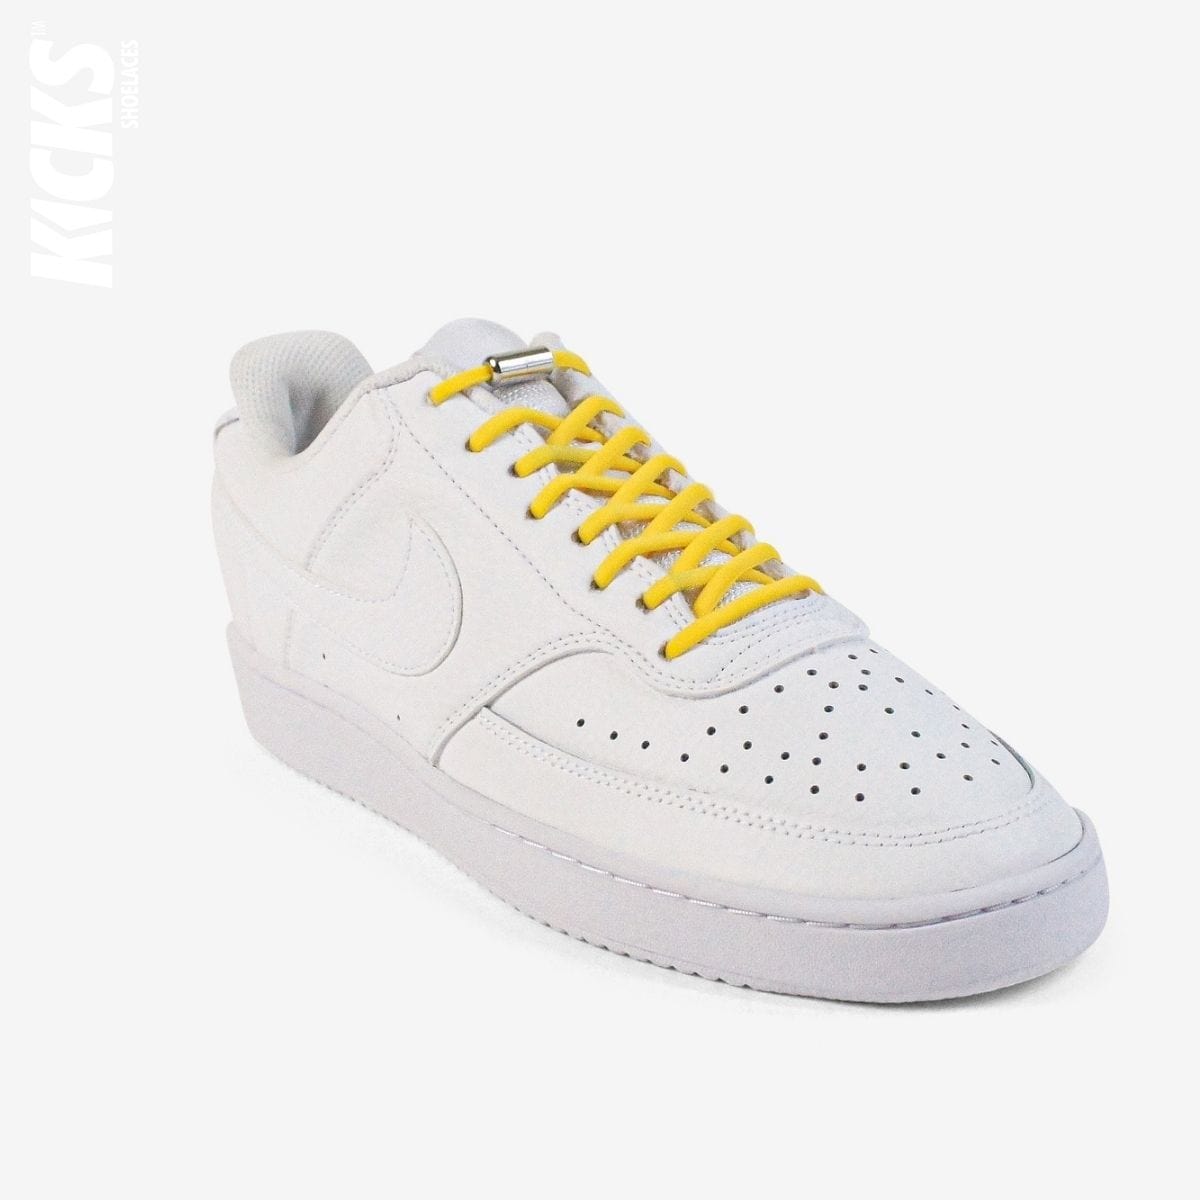 round-no-tie-shoelaces-with-golden-yellow-laces-on-nike-white-sneakers-by-kicks-shoelaces